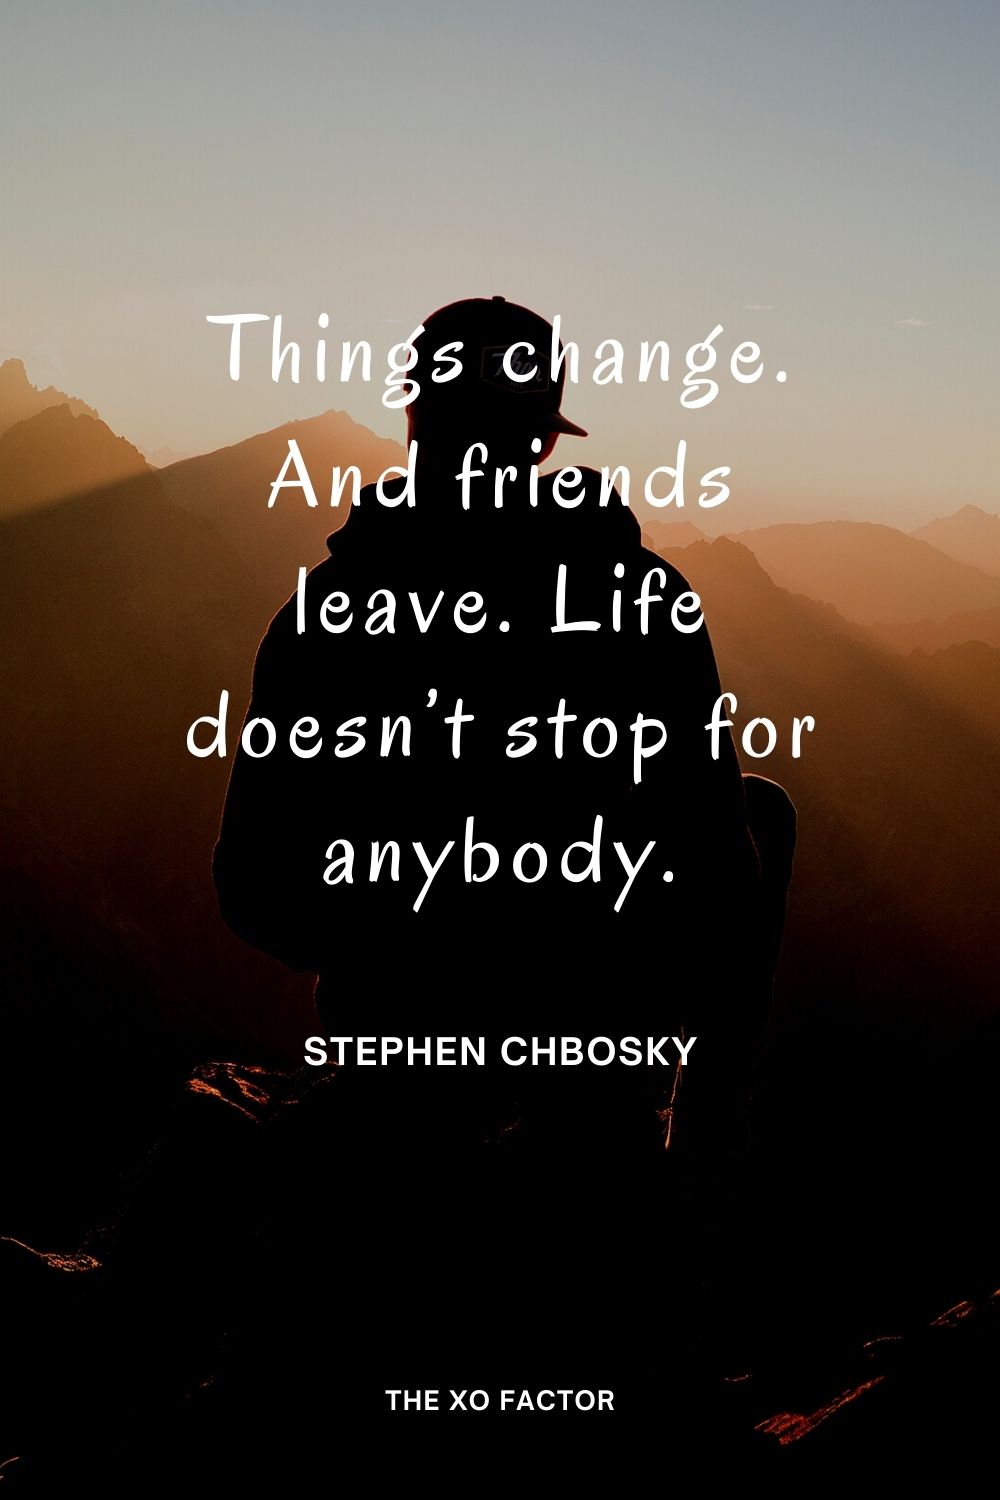 Things change. And friends leave. Life doesn’t stop for anybody. Stephen Chbosky
change quotes